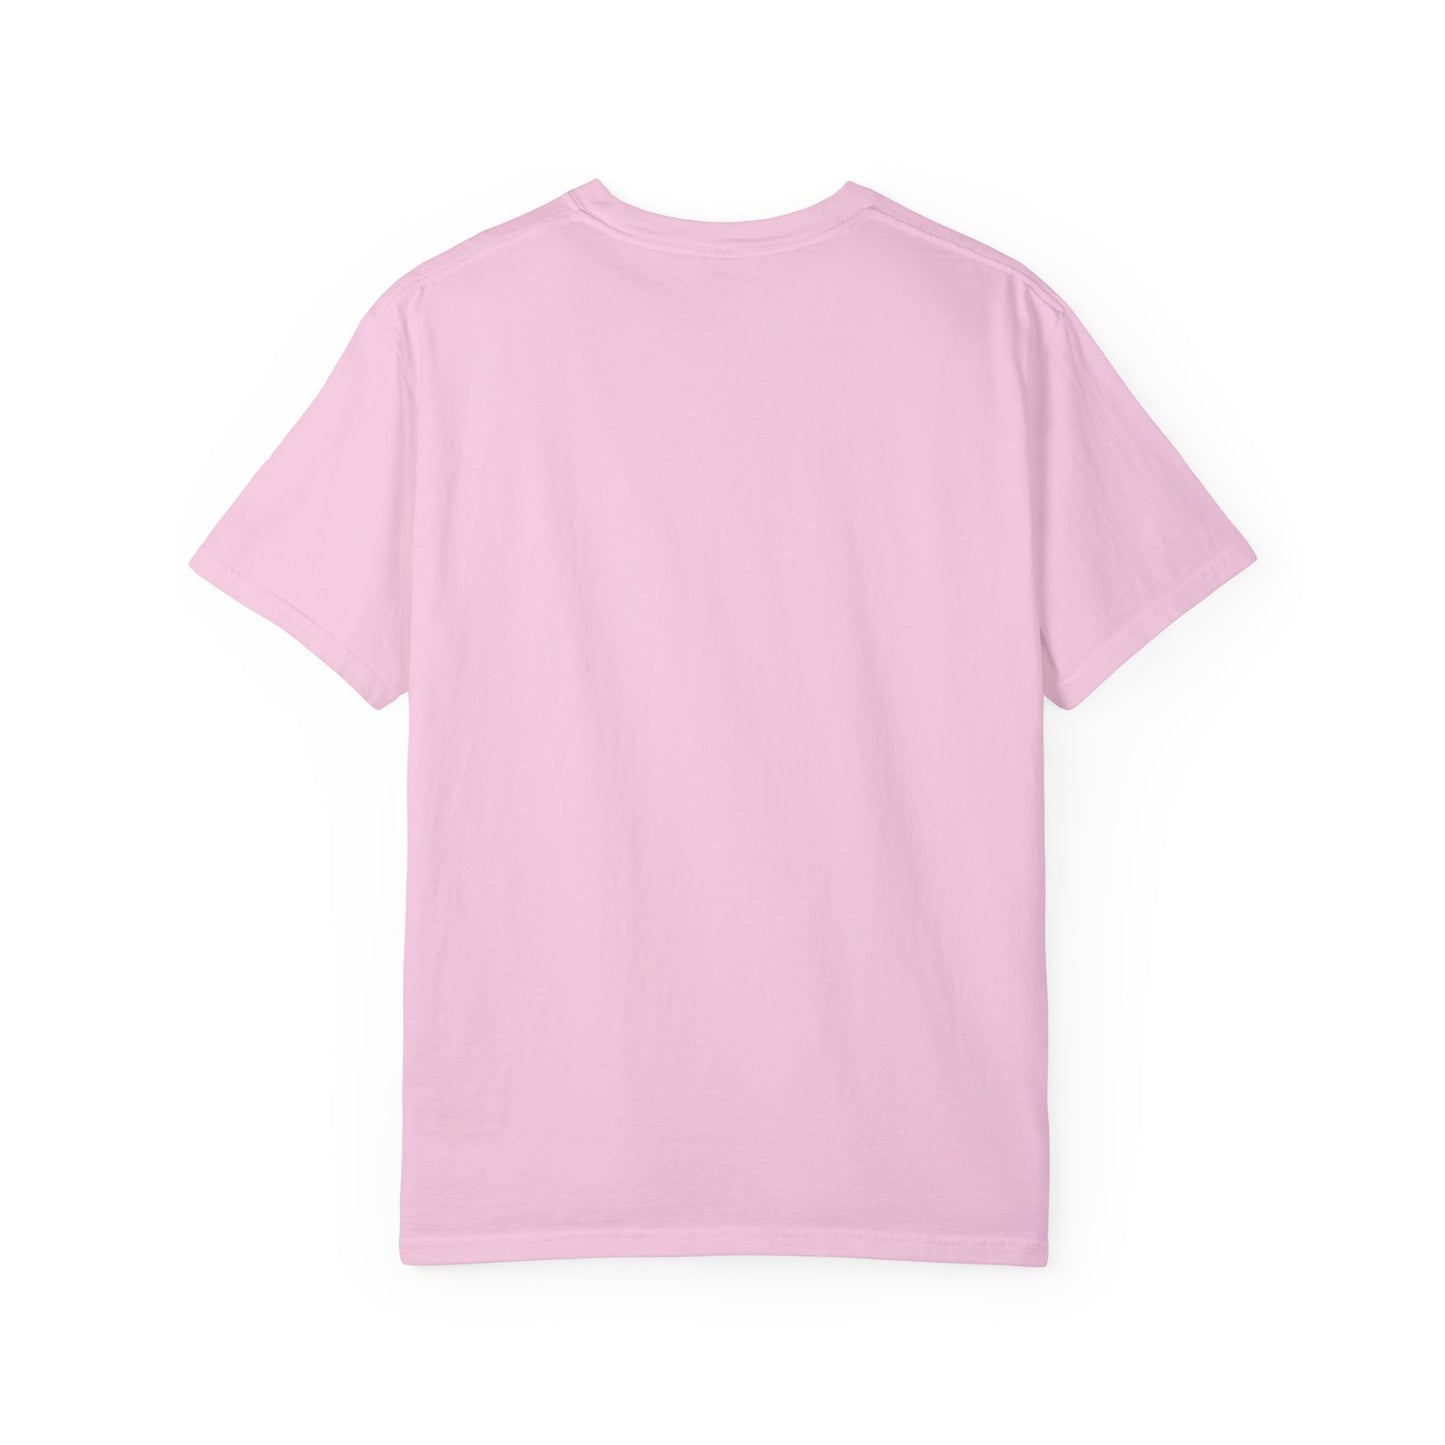 You Can Throw A Party Comfort Colors Tee